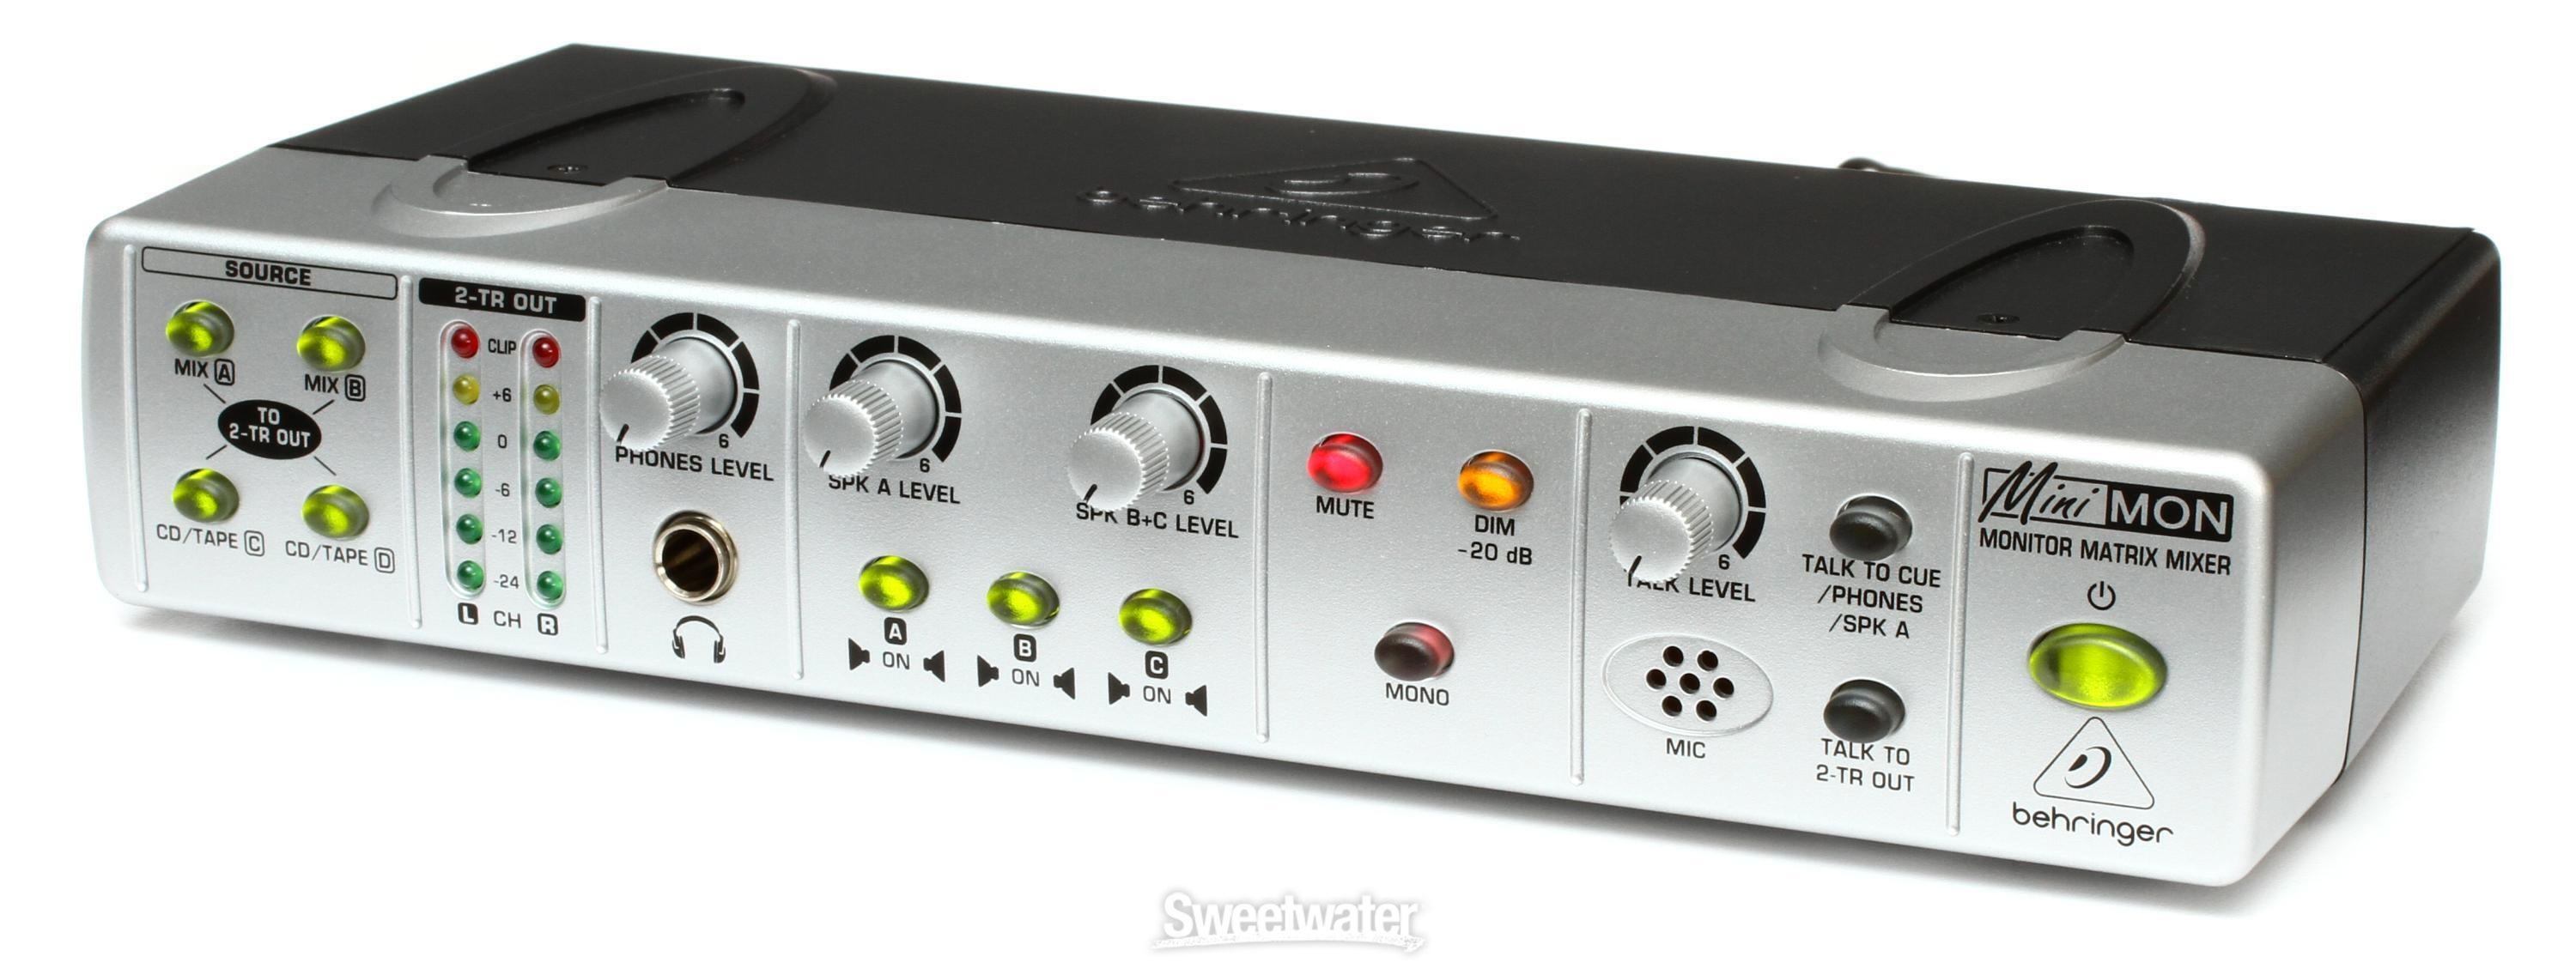 Behringer Minimon MON800 Reviews | Sweetwater